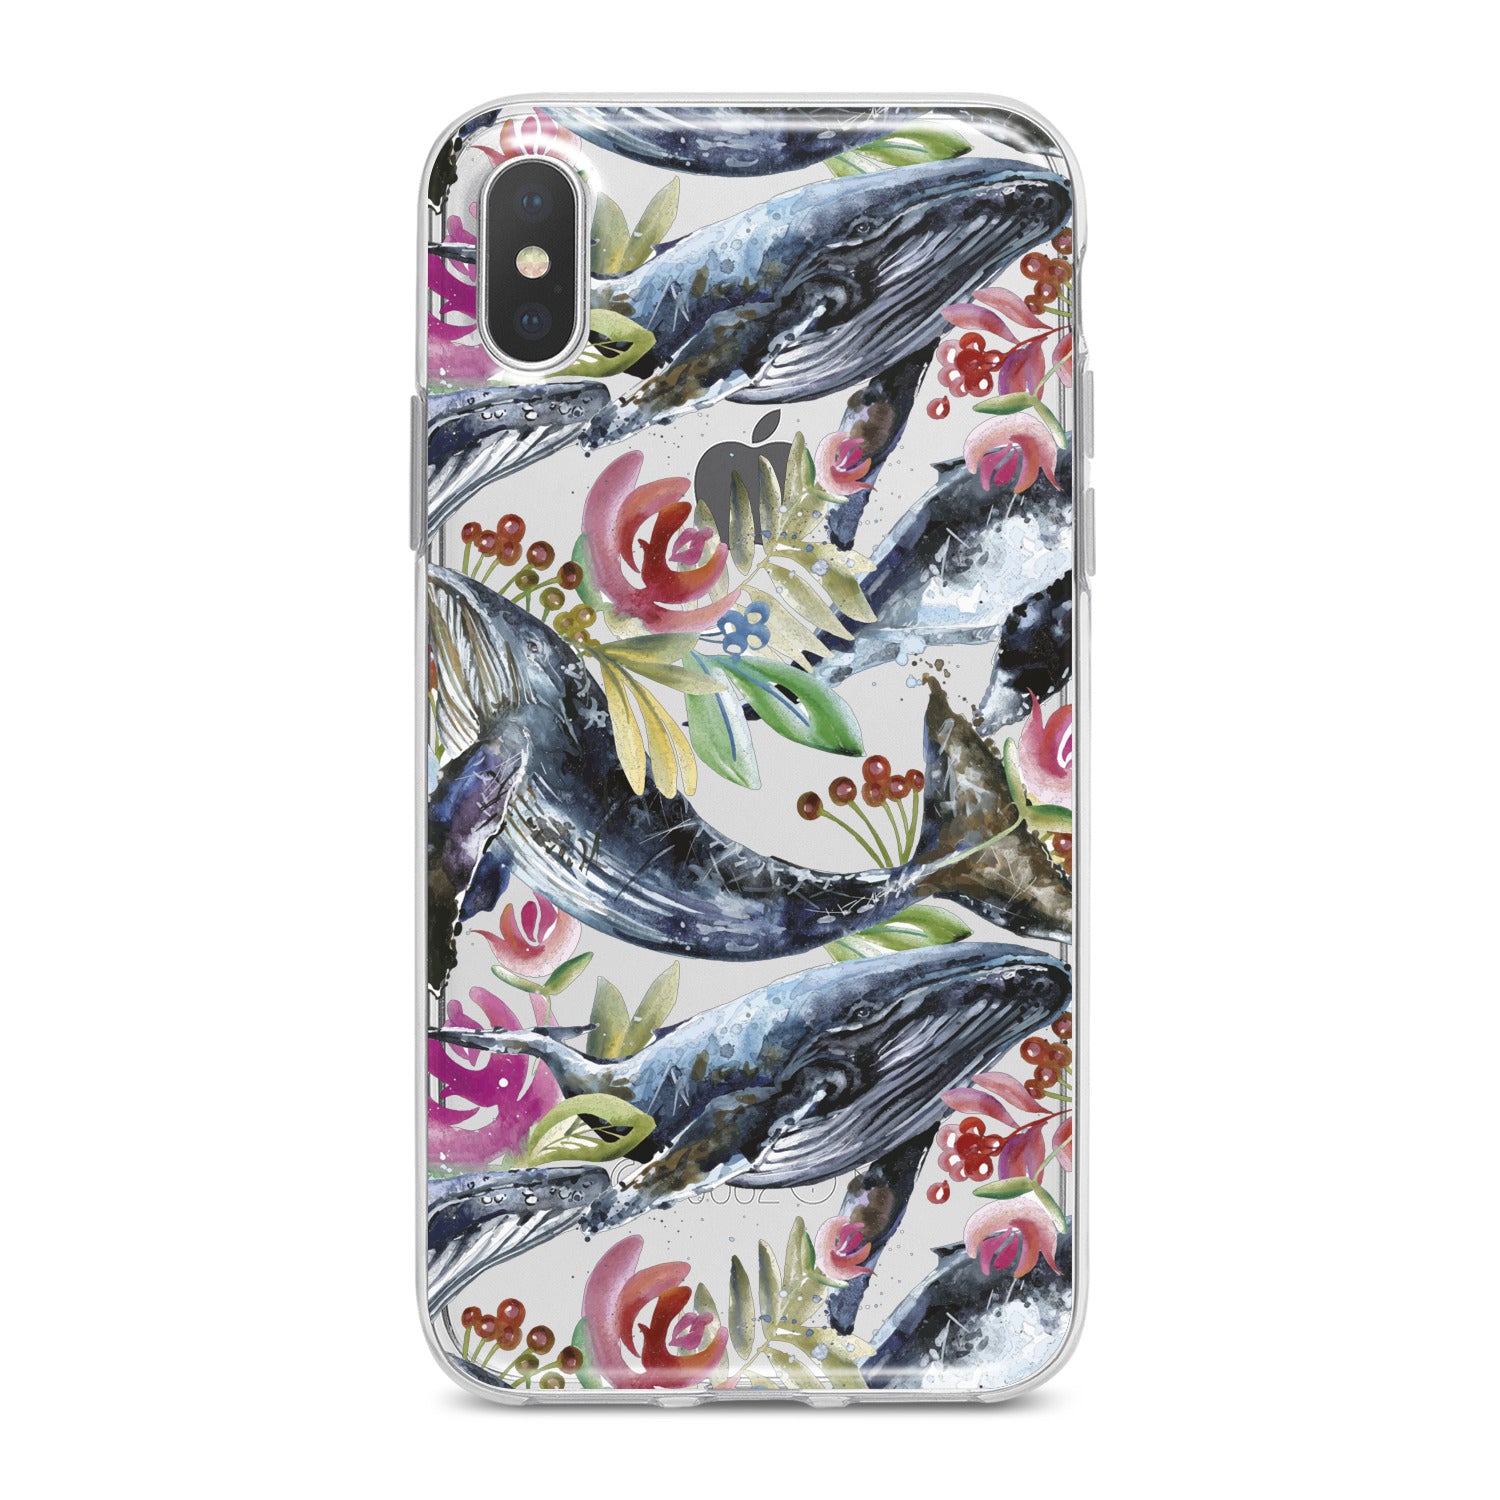 Lex Altern Blue Whale Pattern Phone Case for your iPhone & Android phone.